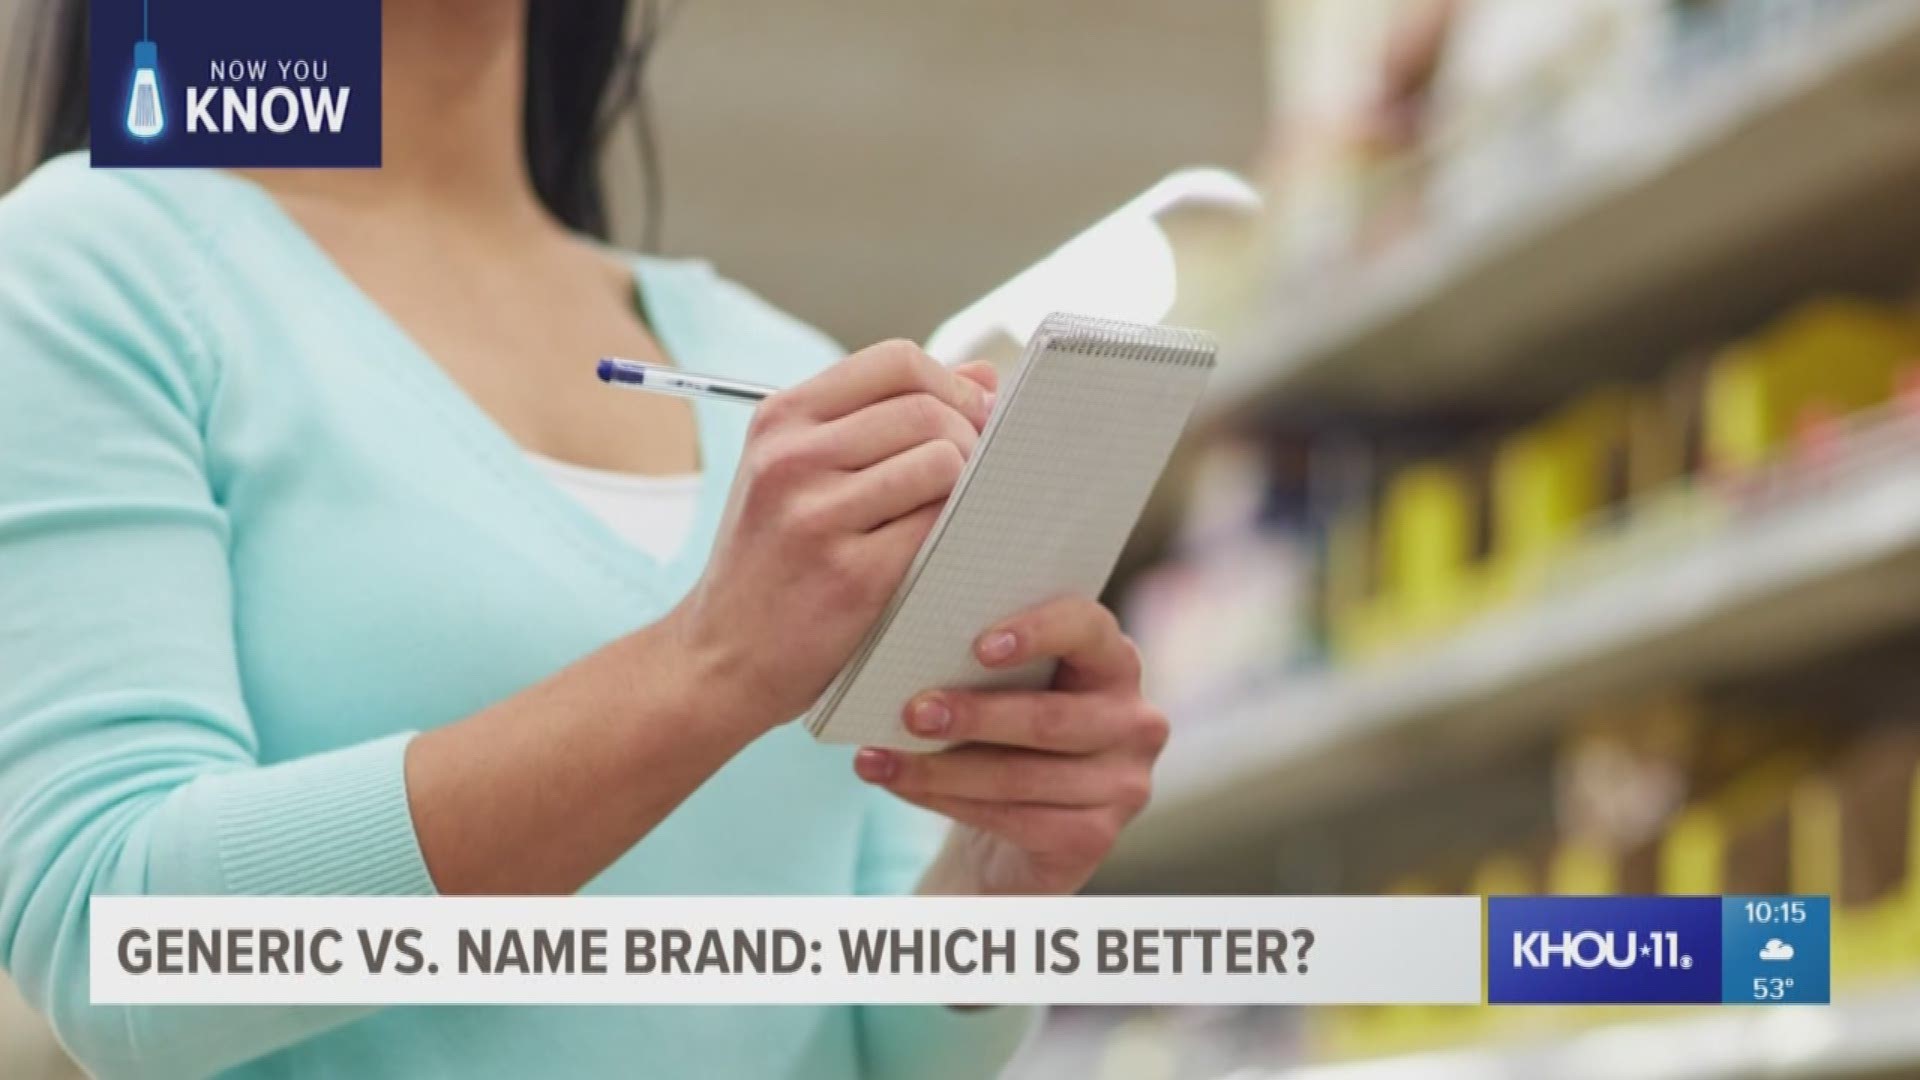 Does paying more for the name brand mean you actually get a better quality product? KHOU 11 Reporter Stephanie Whitfield is letting you decide.